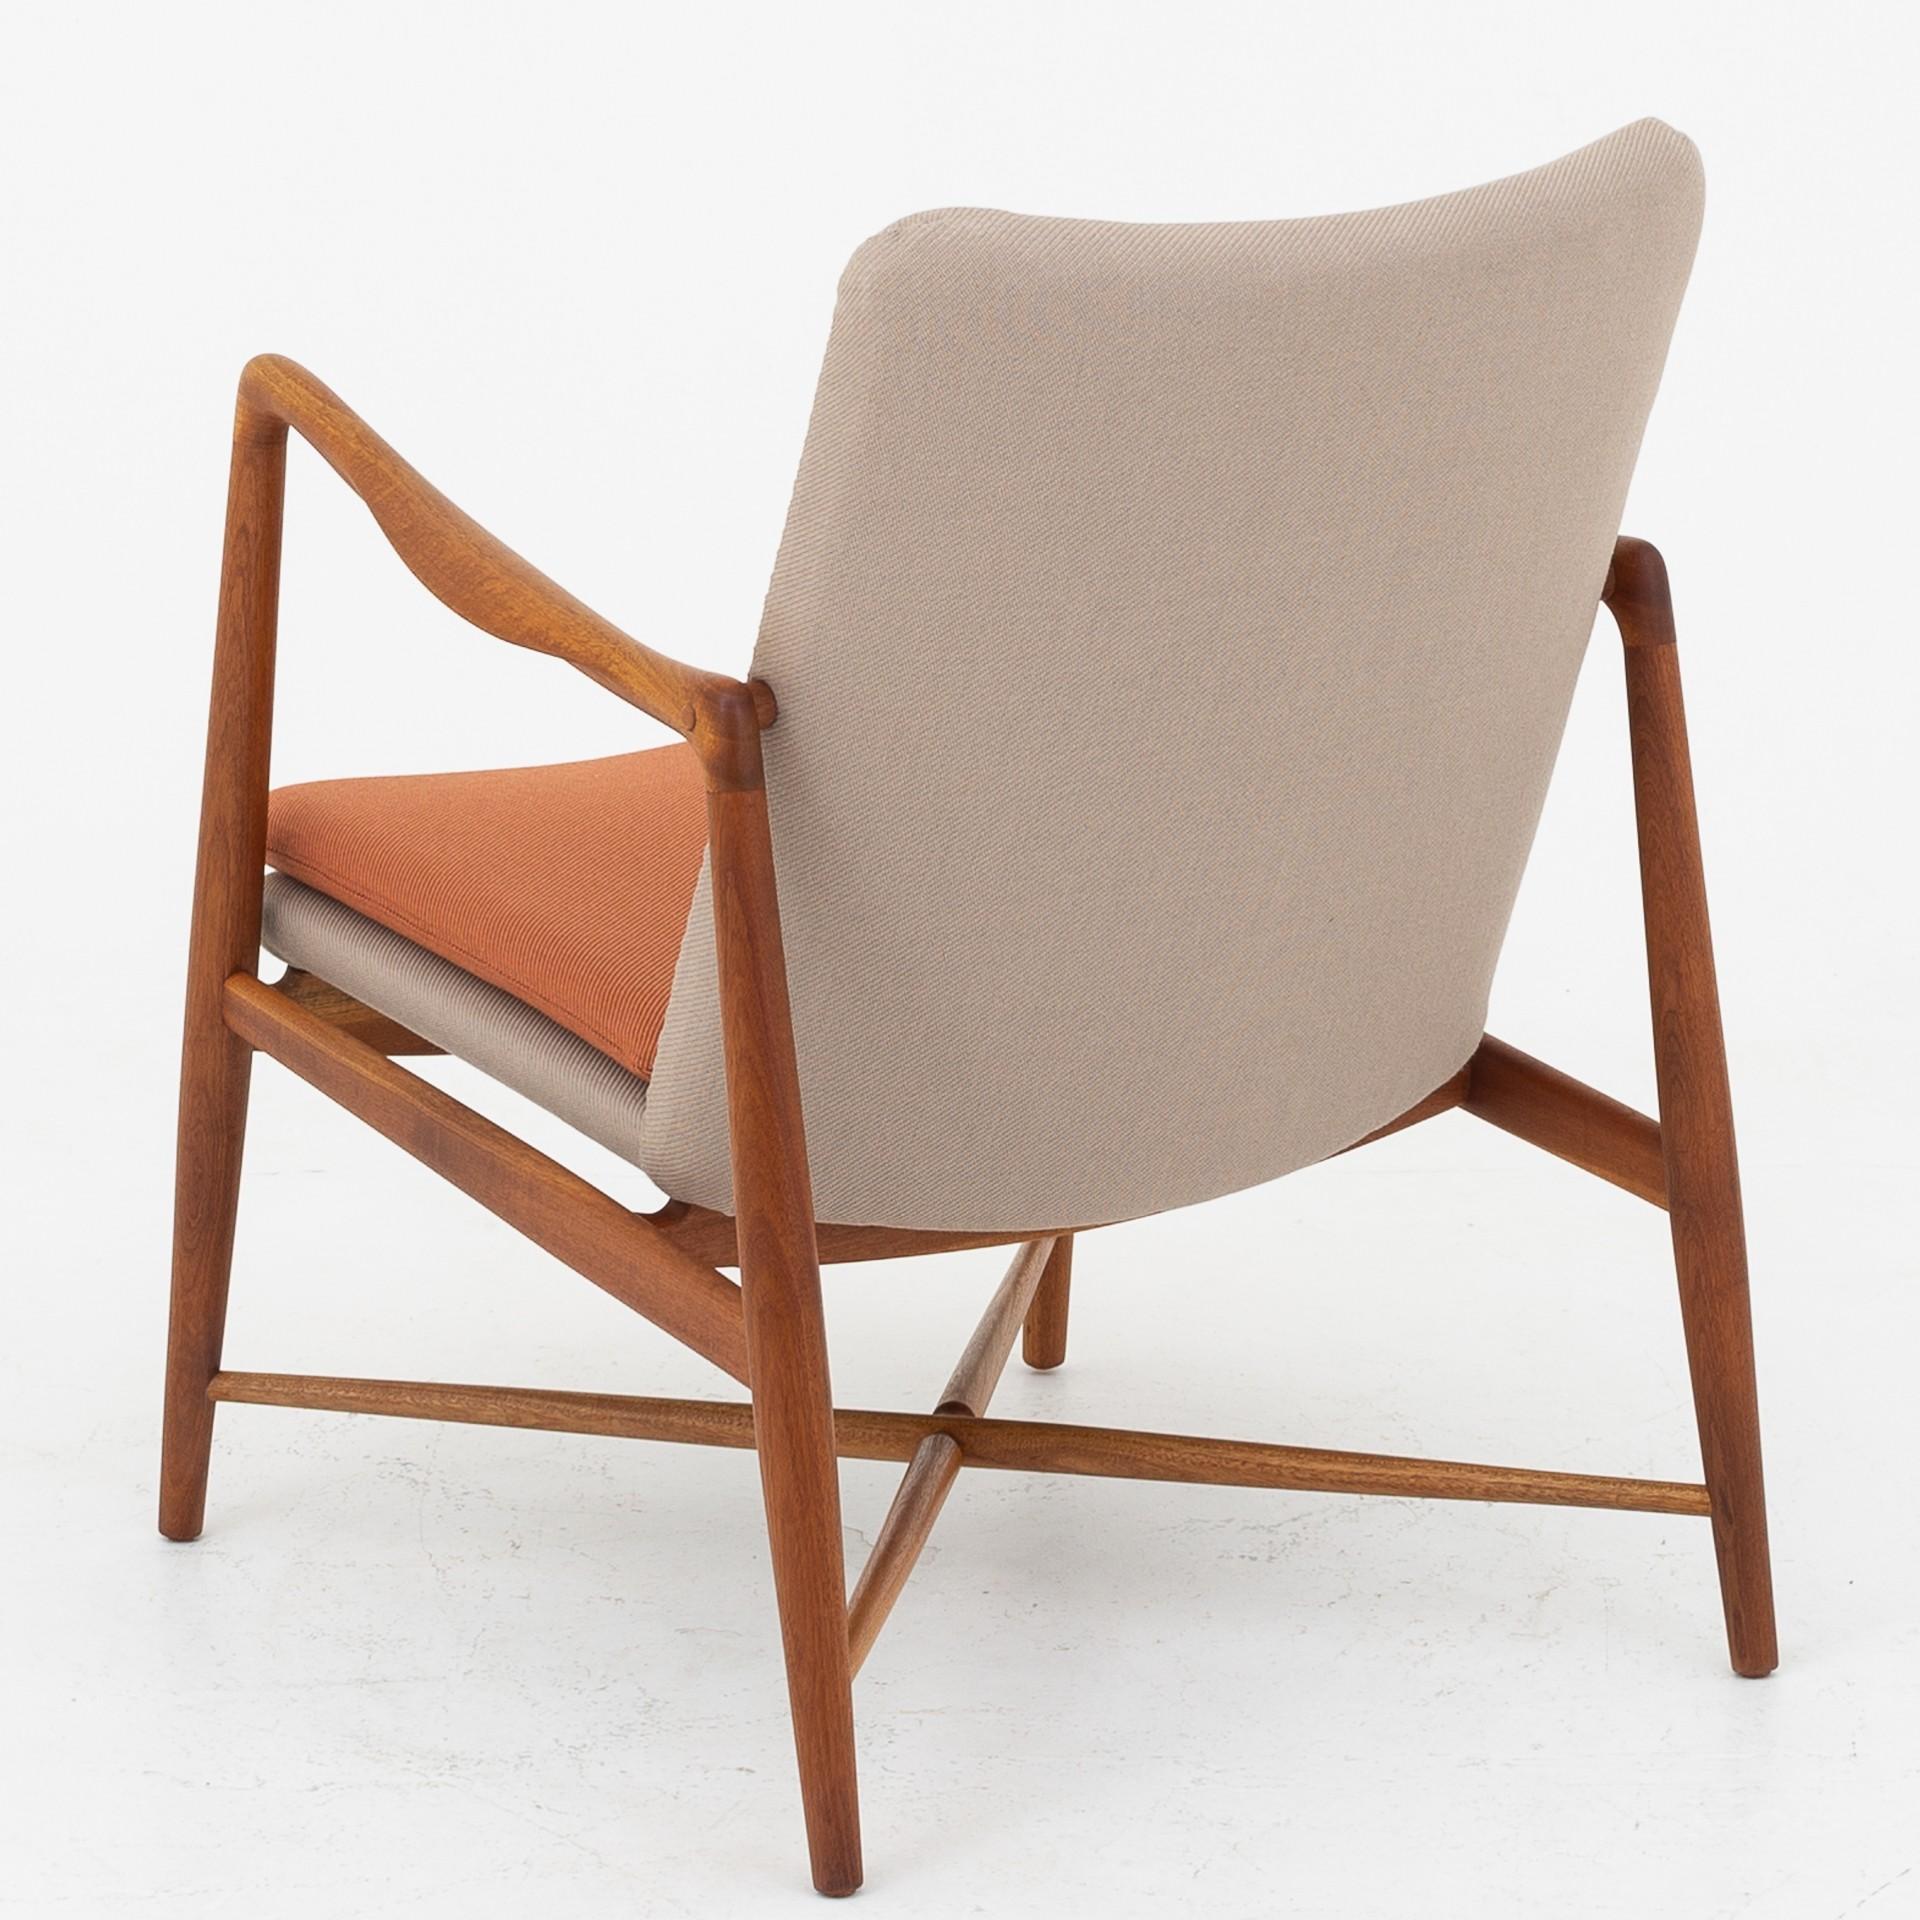 BO 59 - Easy chair in mahogany with new fabric (Twill Weave from Kvadrat - code 230 & 550). Designed in 1946. Maker Bovirke.